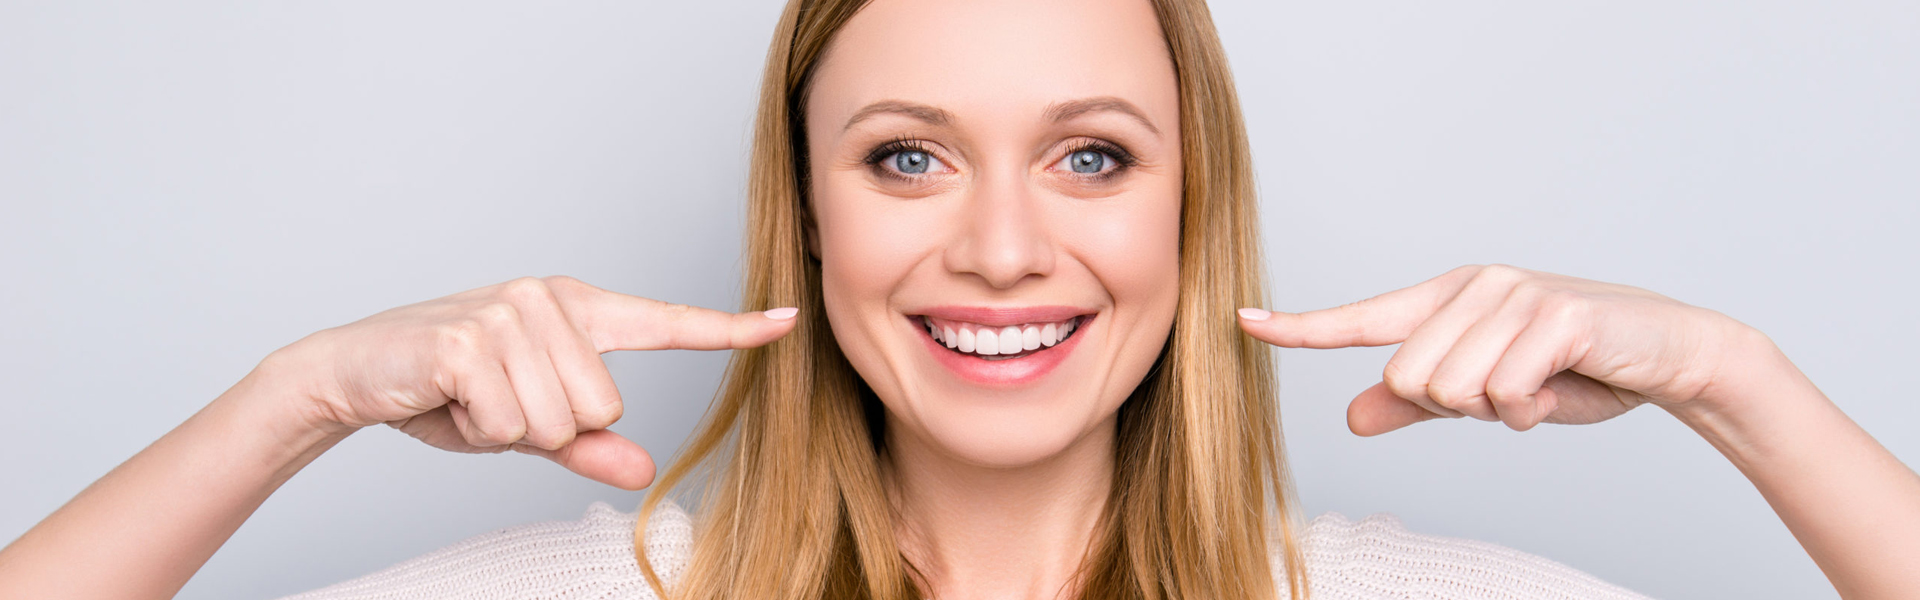 Fixing Problems with Your Teeth Is Not Challenging with Dental Veneers